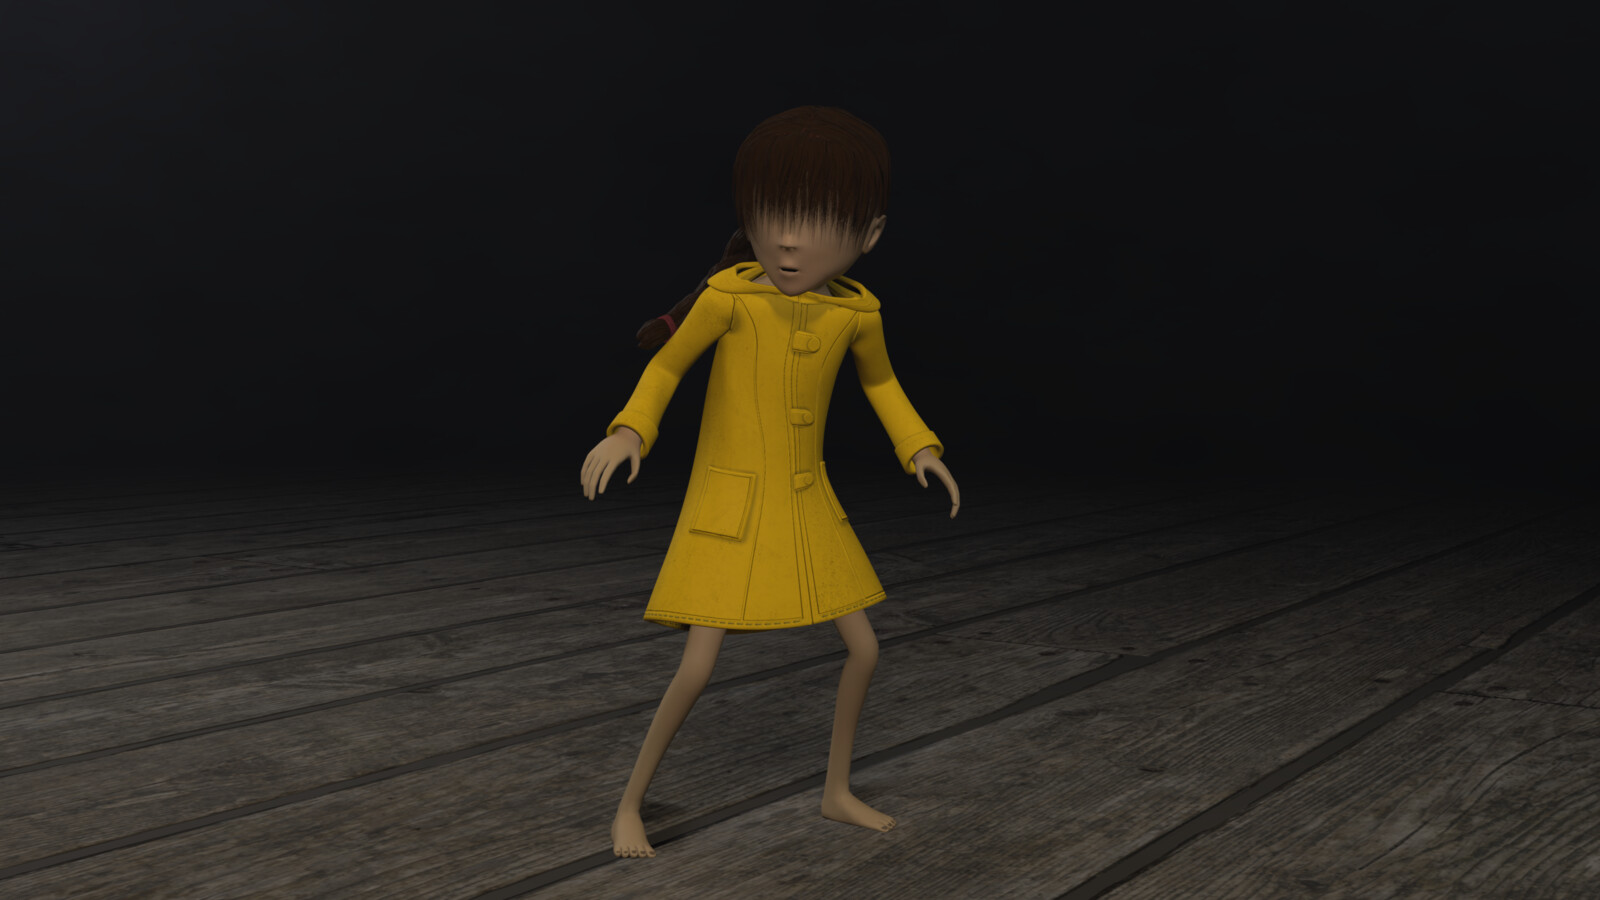 The girl in the yellow Raincoat